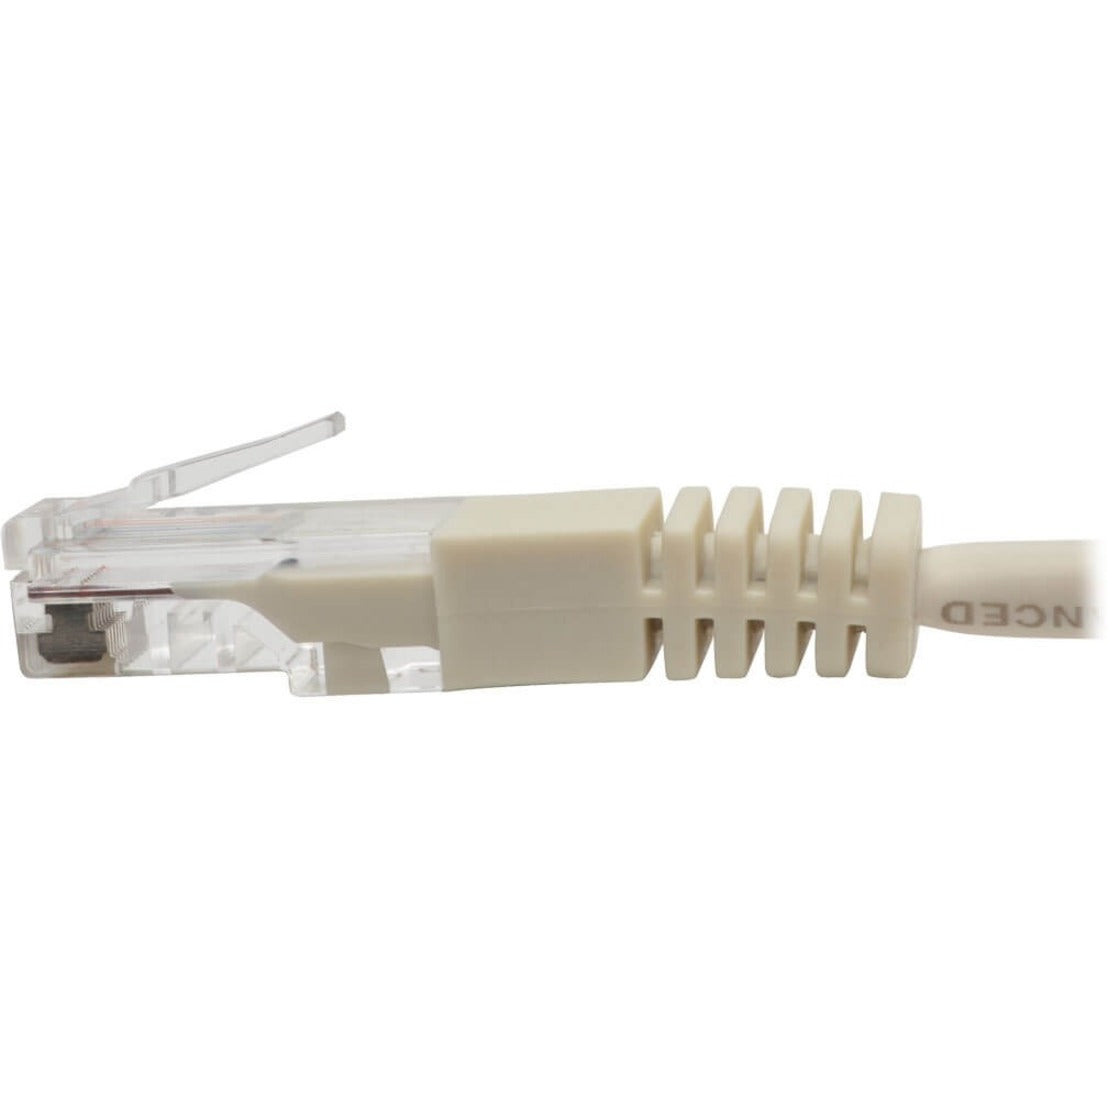 Tripp Lite N002-007-WH Cat5e Patch Cable, 7-ft. Molded 350MHz, White